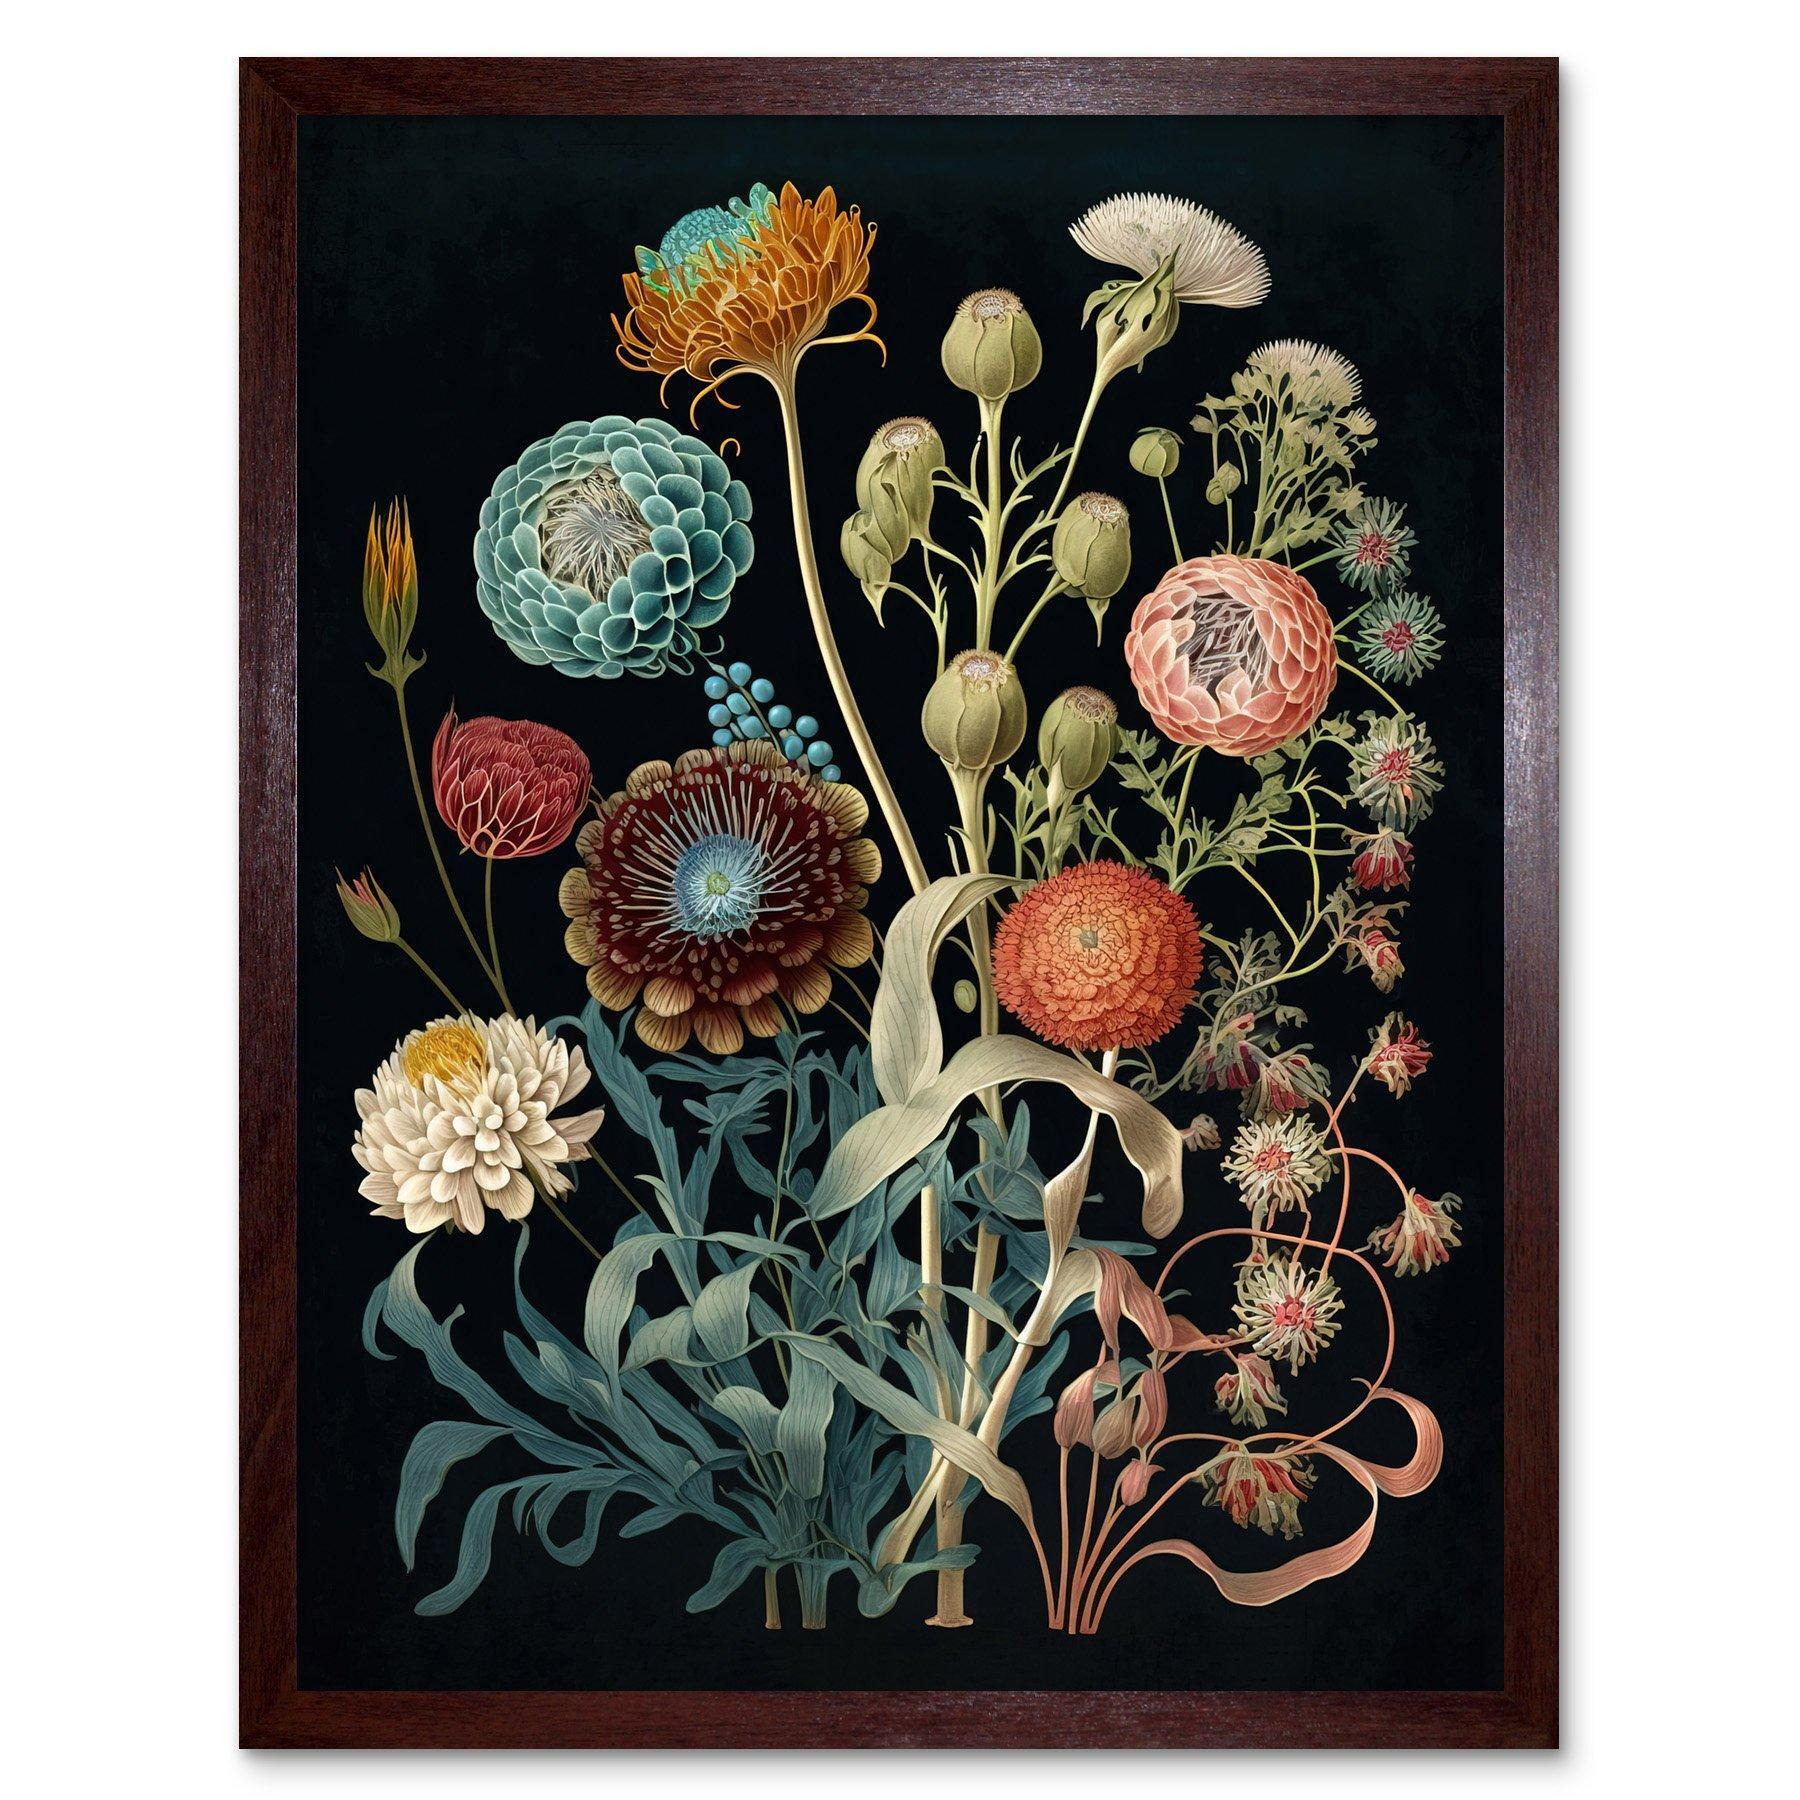 Vintage Botanical Ernst Haeckel Style Plant Study Modern Watercolour Painting Illustration Art Print Framed Poster Wall Decor 12x16 inch - image 1